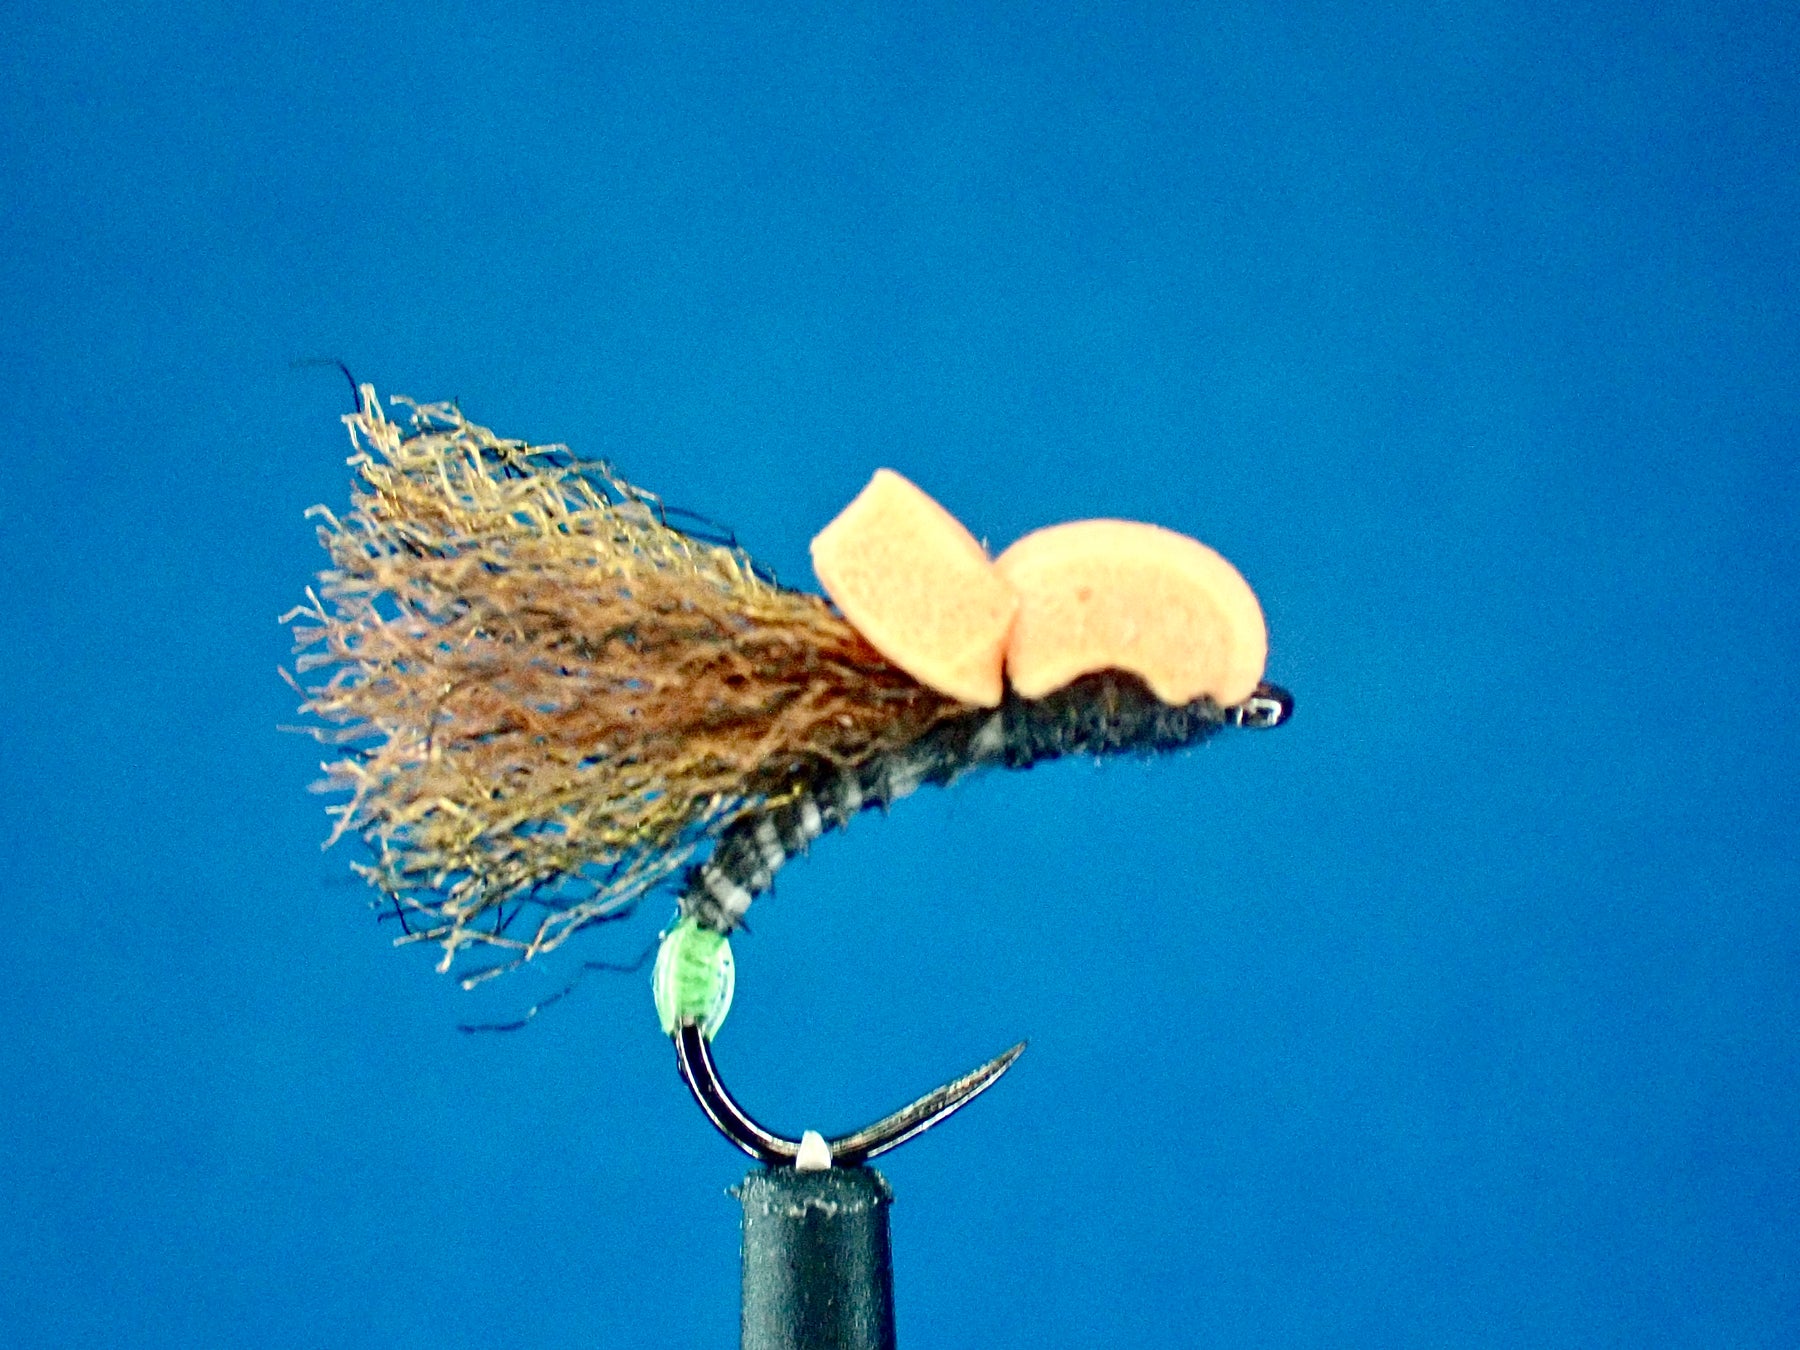 Unveiling the Egg Laying Black Balloon Caddis: A Match for the Elusive Black Caddis